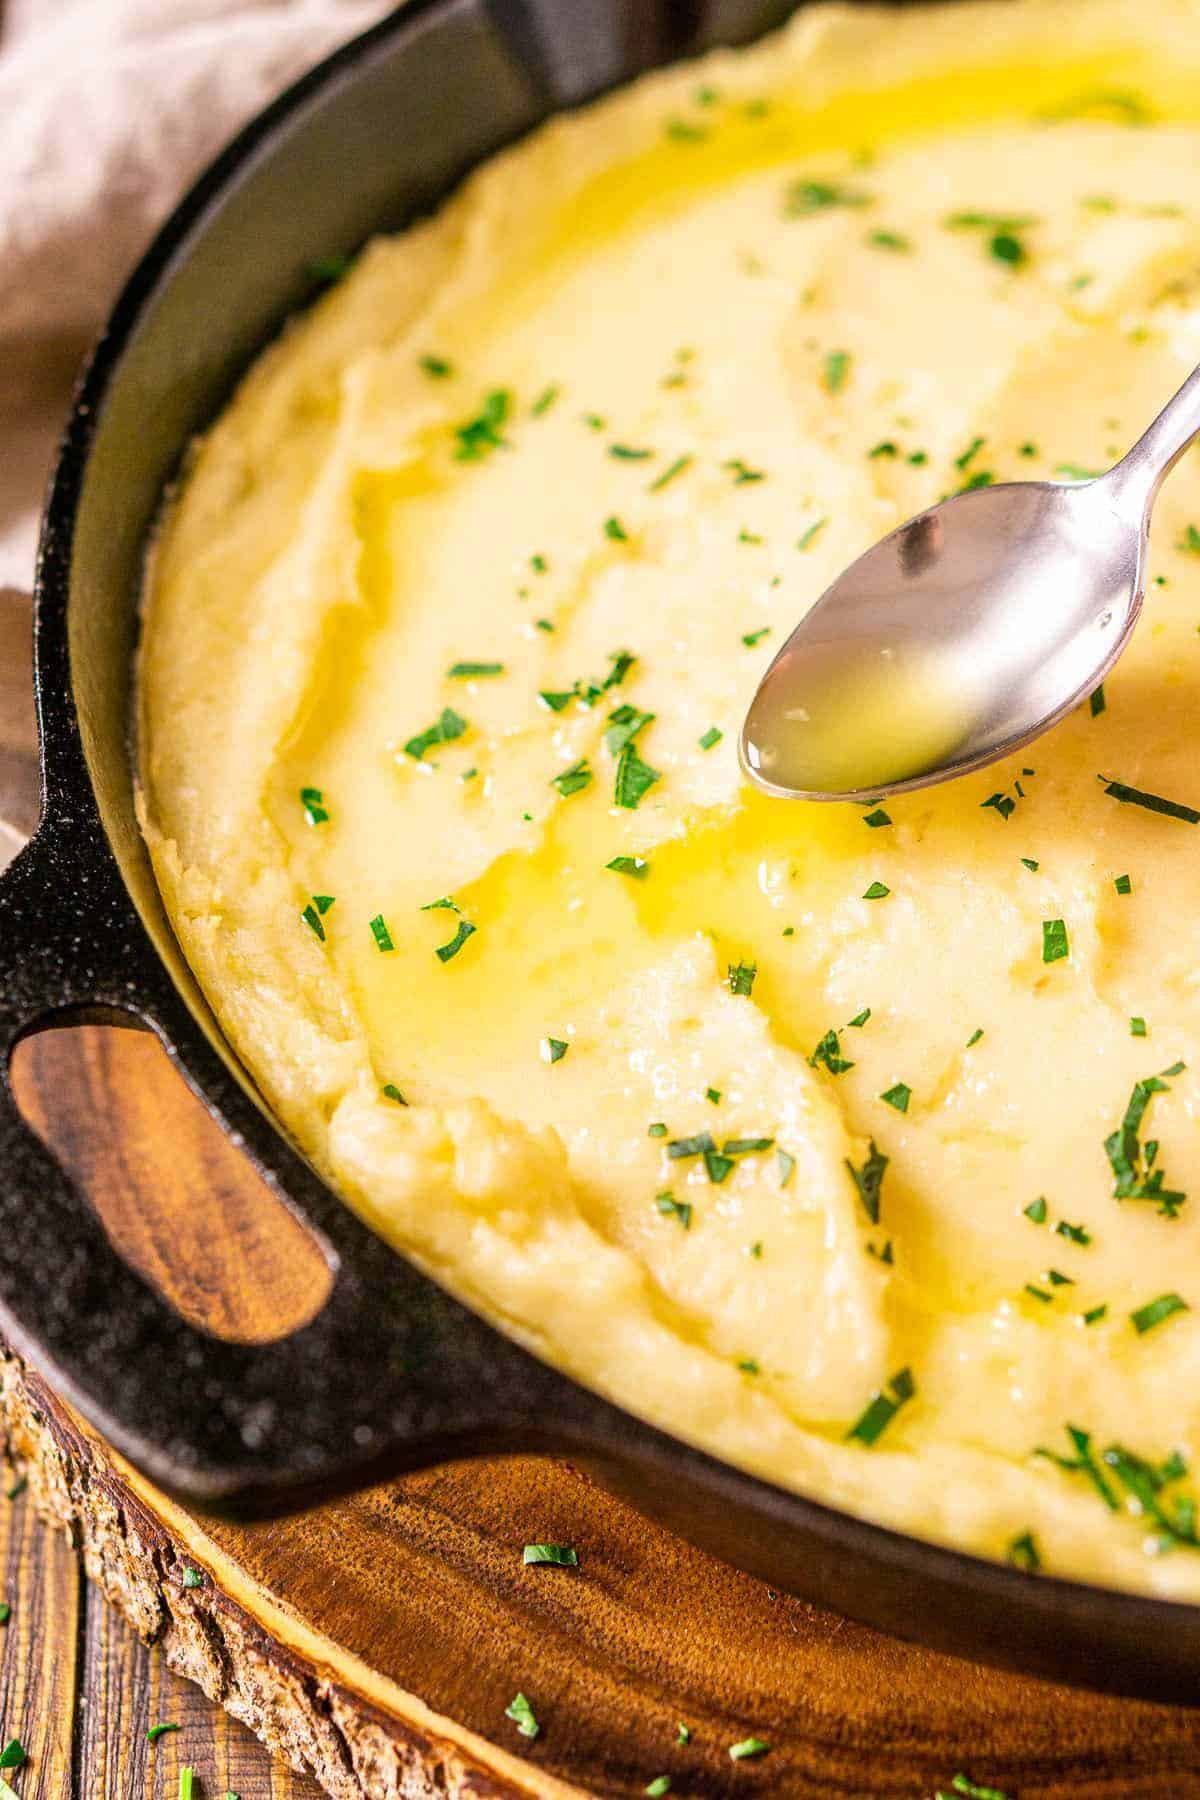 A silver spoon pouring melted butter on top of mashed potatoes in a black cast-iron skillet on top of a wooden serving platter.